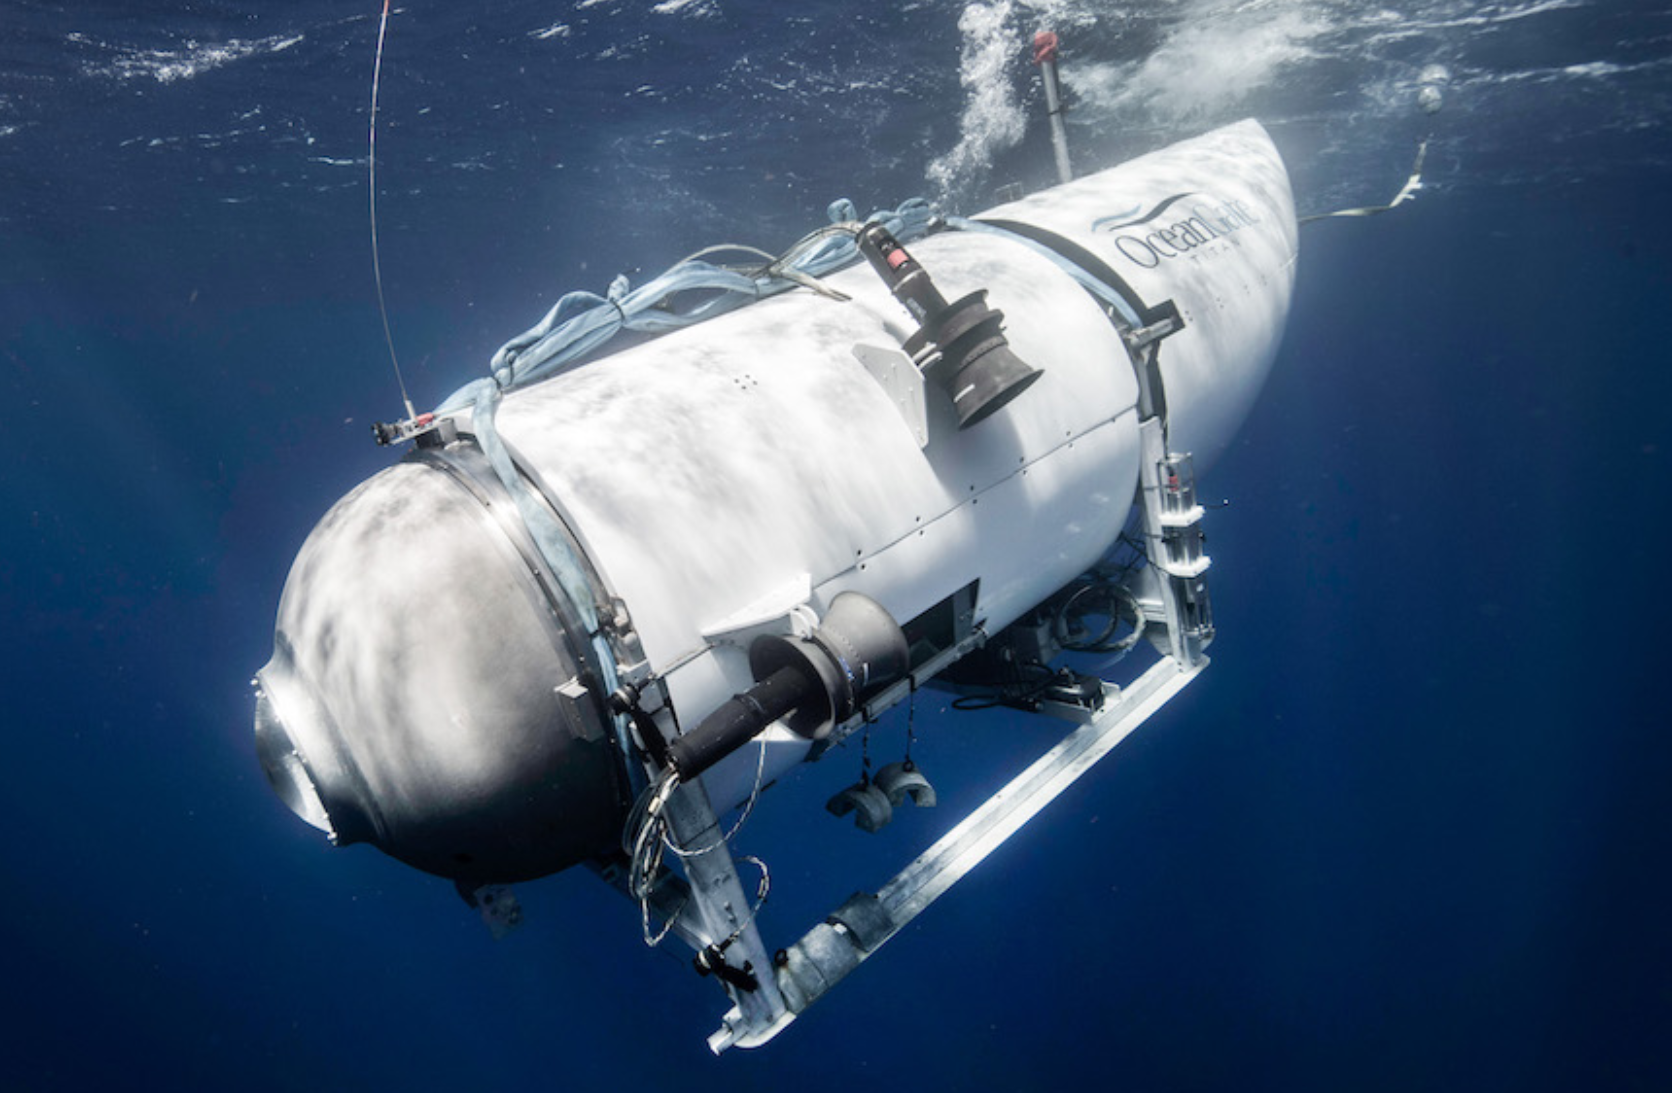 Ocean World Away Teams: Alan Stern Announces Call for Mission Specialists for 2023 Titanic Expedition